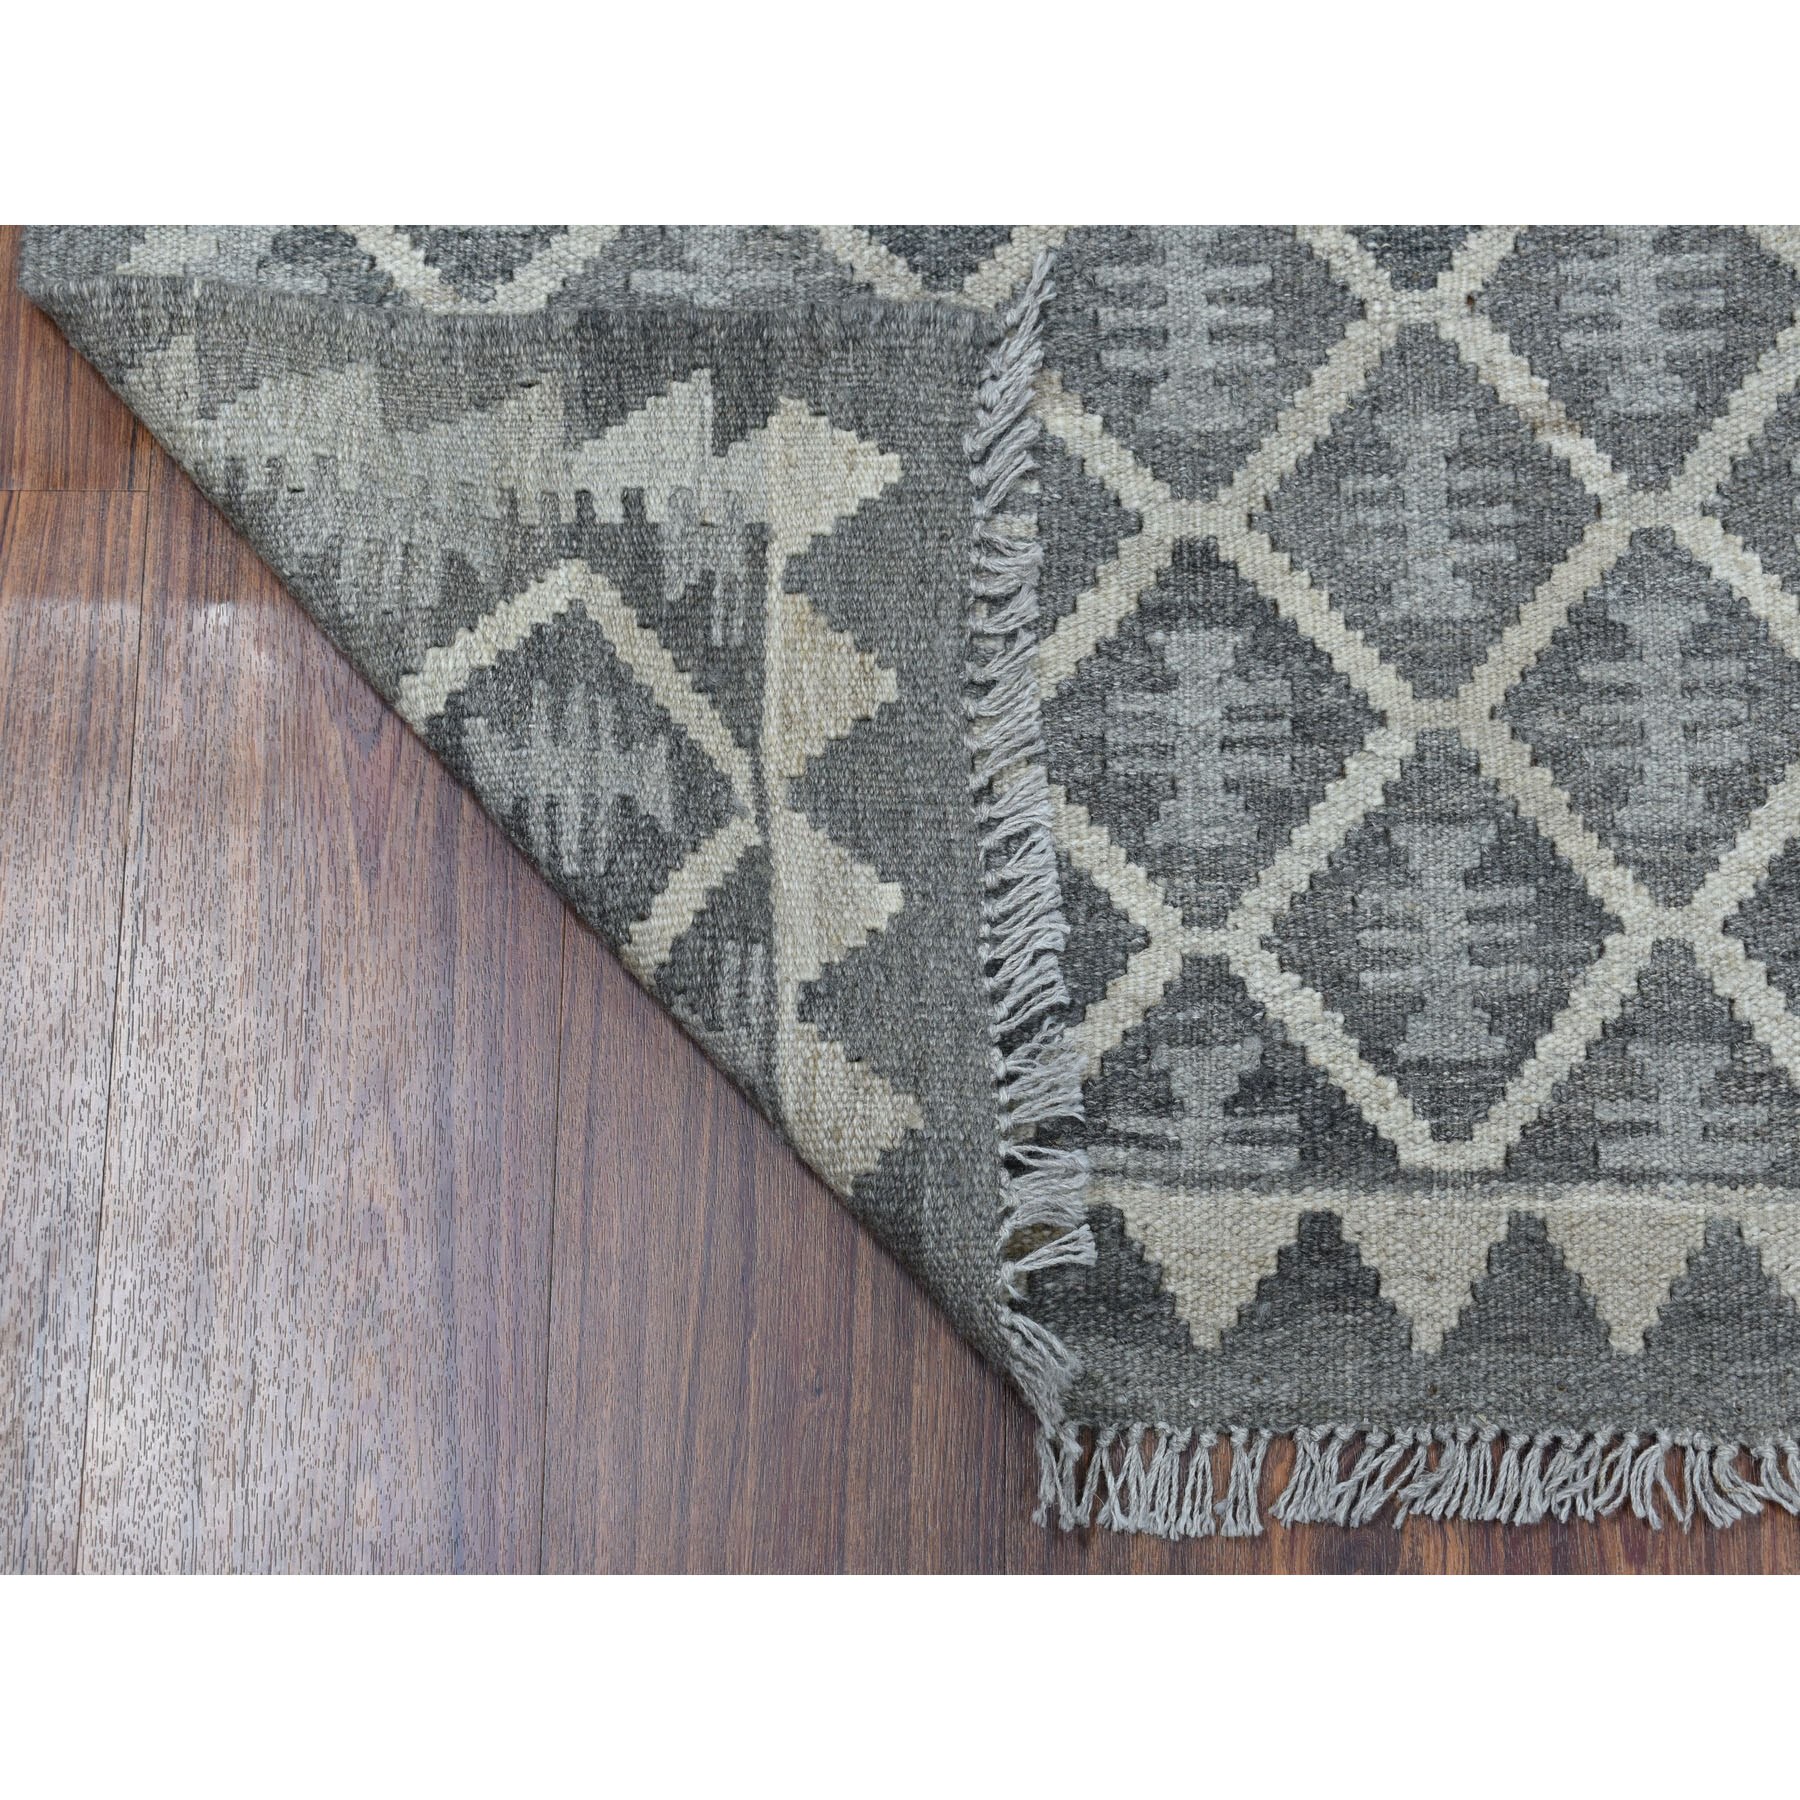 2-8 x4- Undyed Natural Wool Afghan Kilim Reversible Hand Woven Oriental Rug 